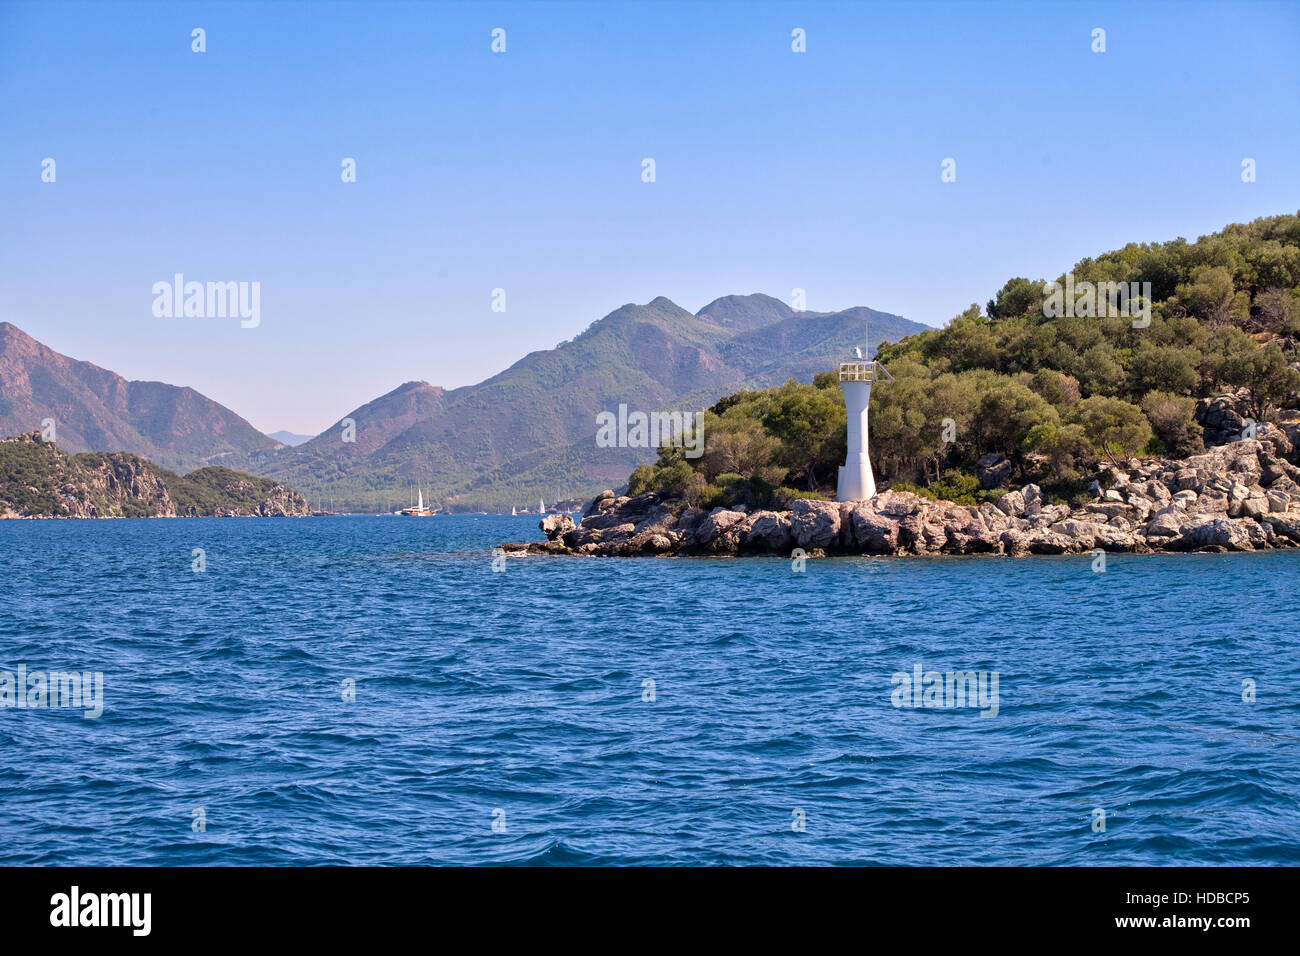 Bay of Marmaris, view from the sea Stock Photo